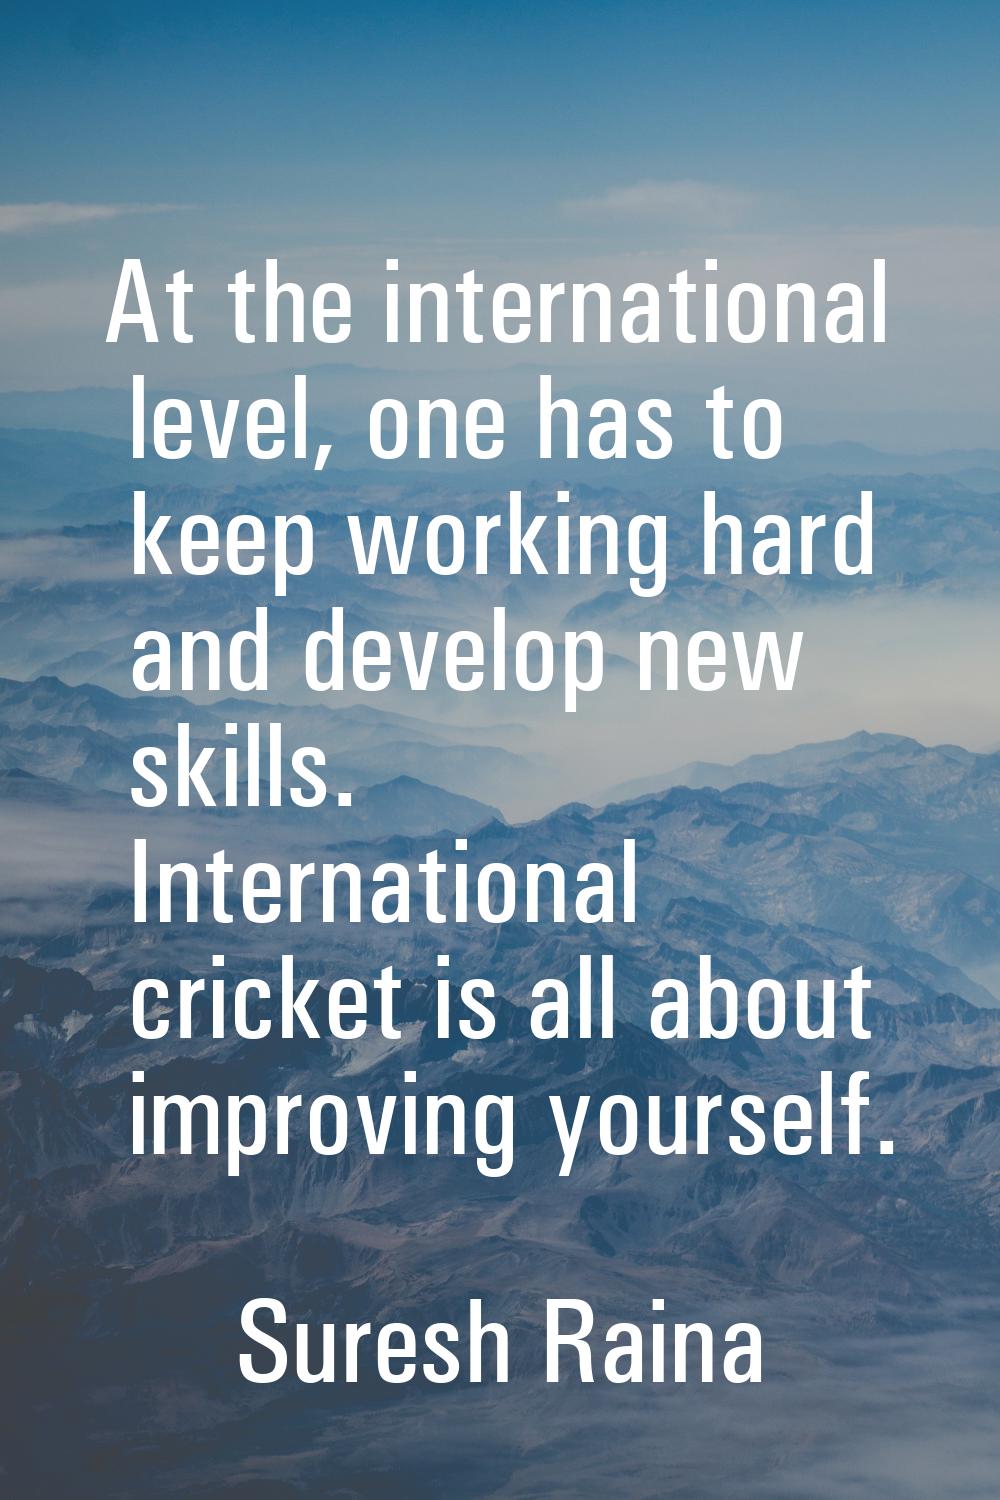 At the international level, one has to keep working hard and develop new skills. International cric